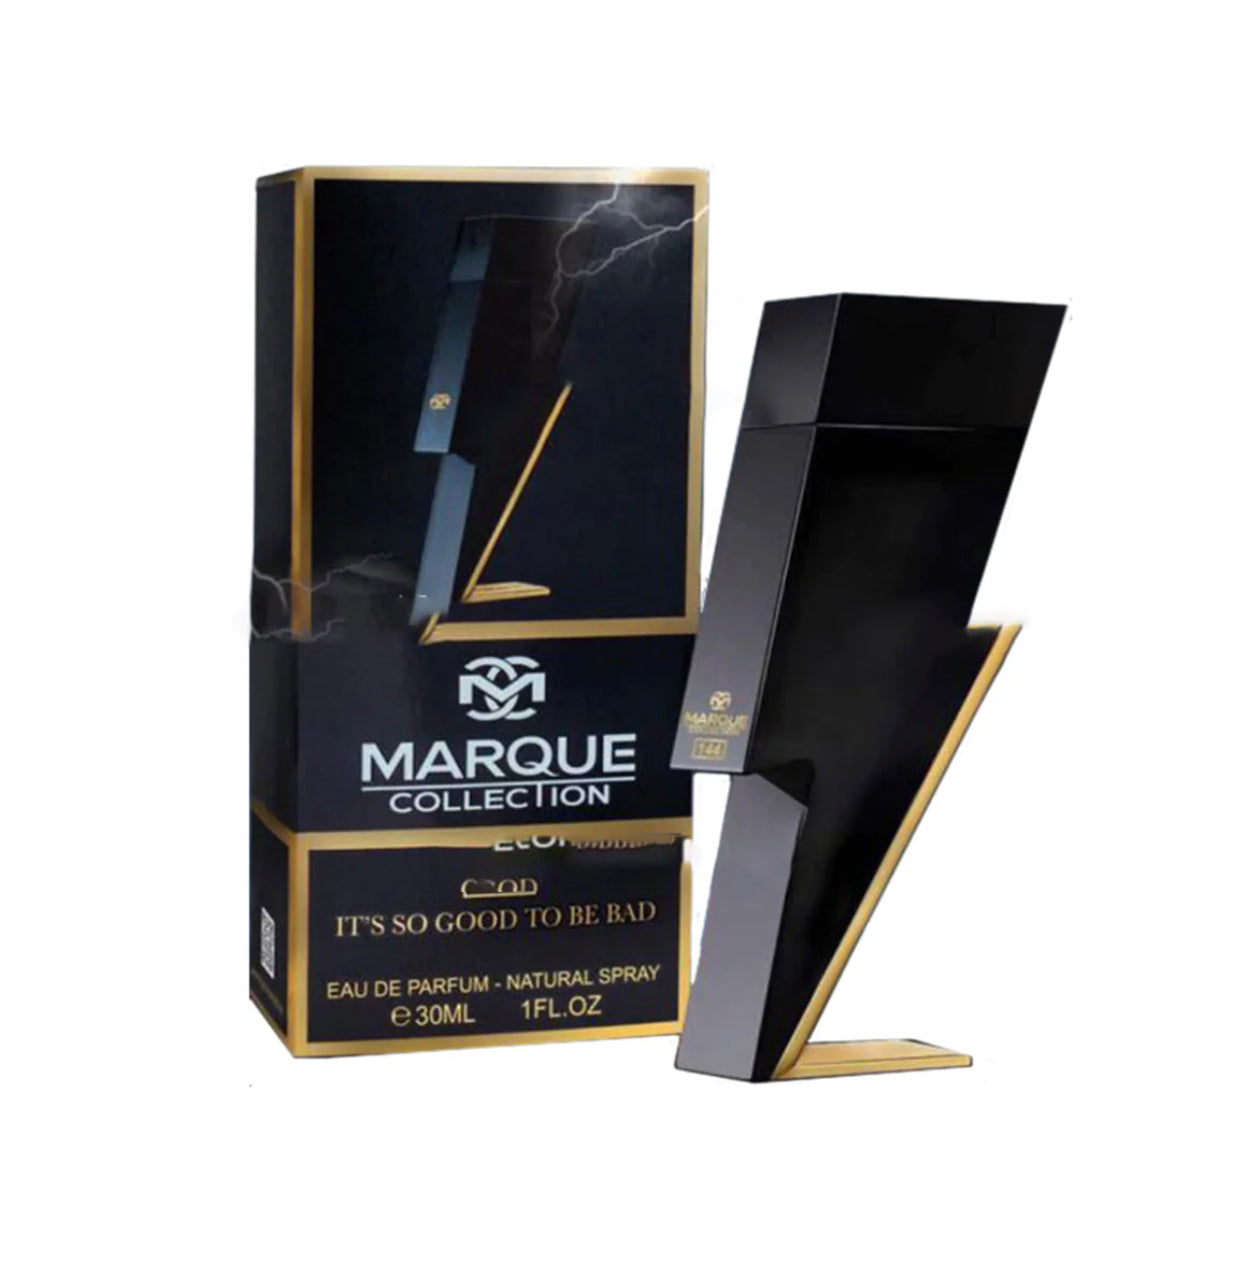 _Gift_Marque 144 Collection Perfume  - 30 ML - Eau de Parfum -Inspired by Bad Boy by Carolina H